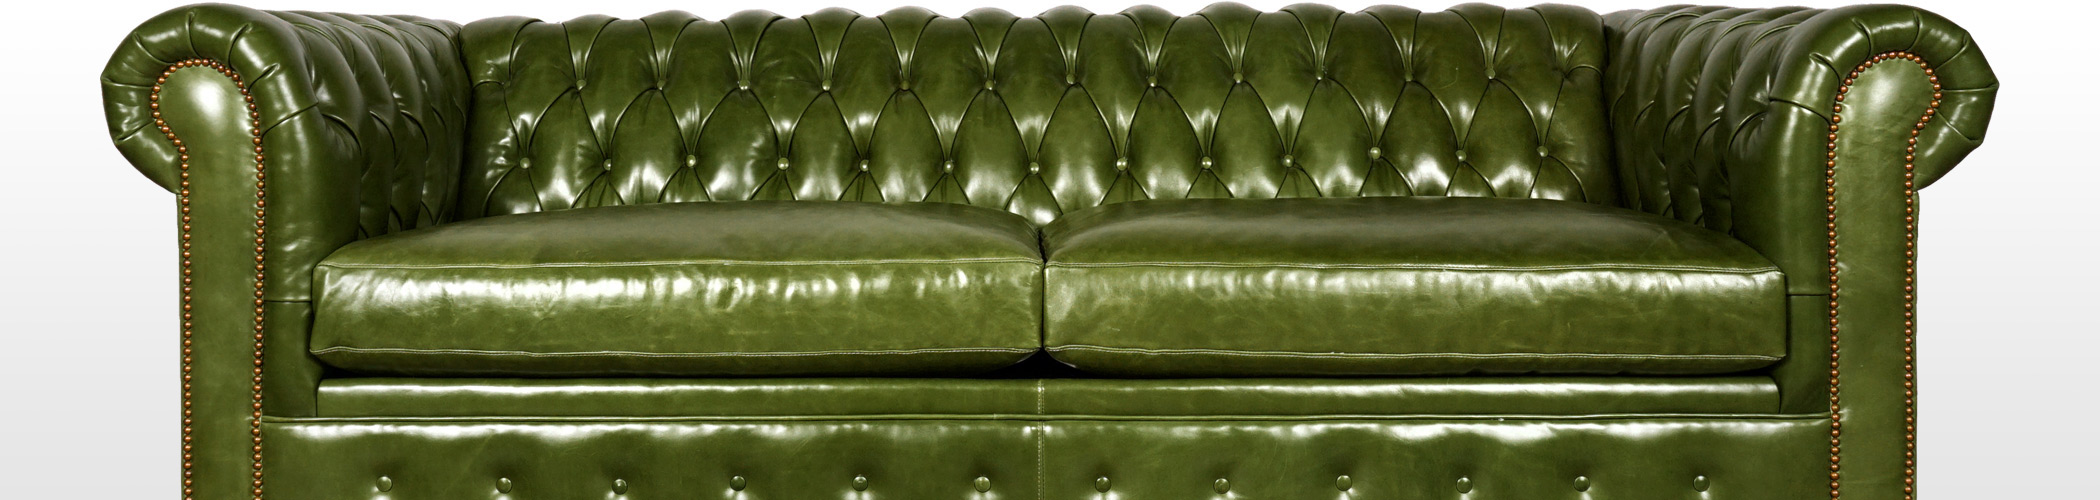 Chesterfield sleeper sofa in green leather